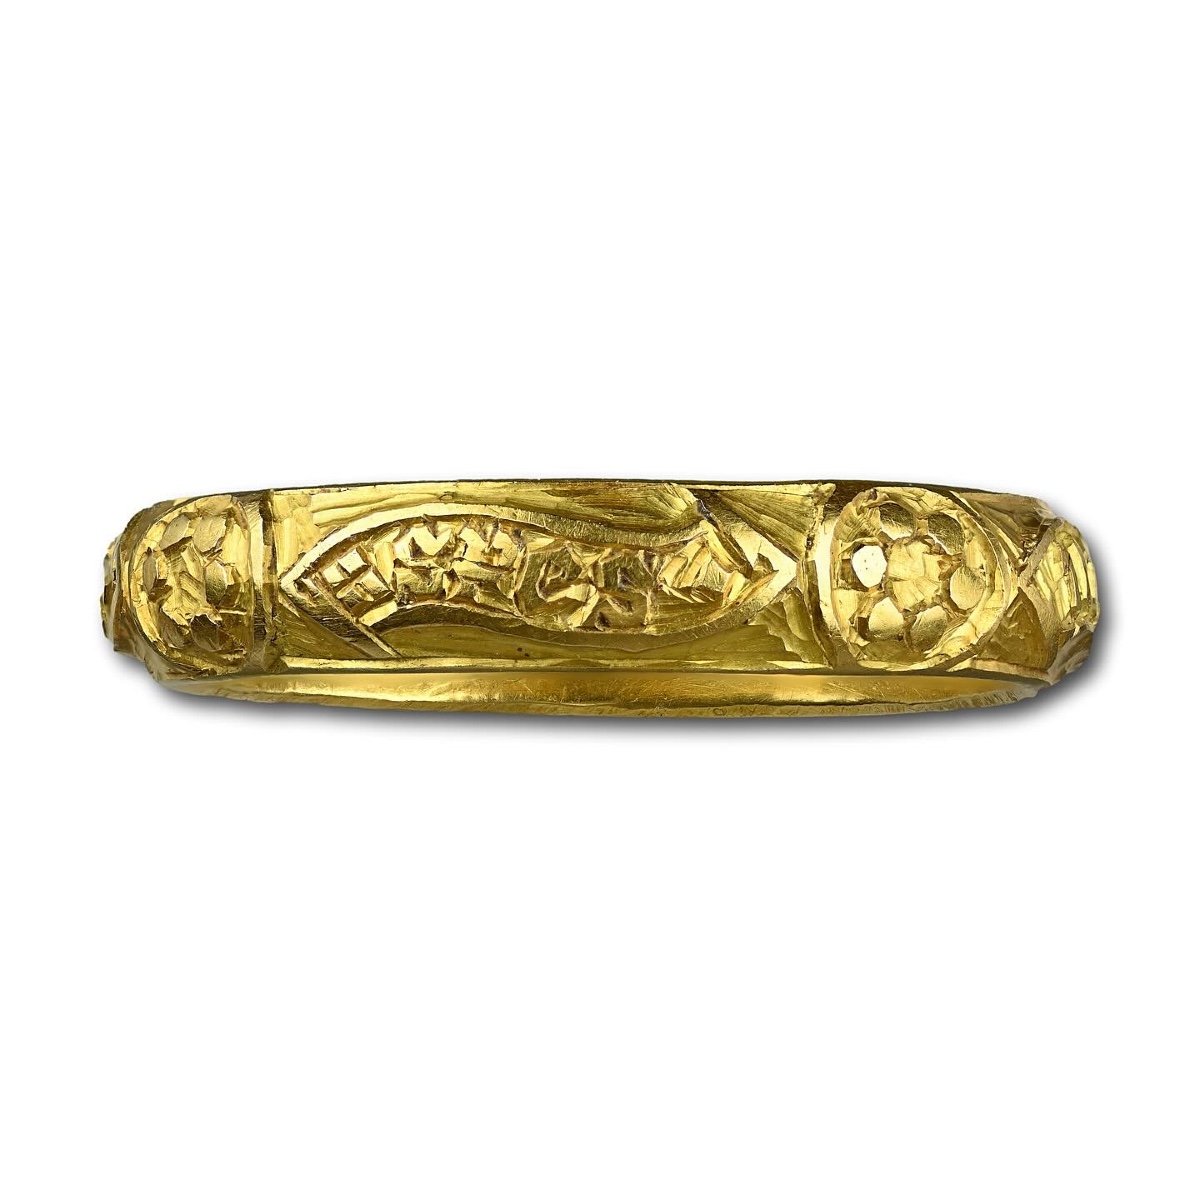 Gold Posy Ring Engraved With Black Letter. Probably English, 15th Century.-photo-2